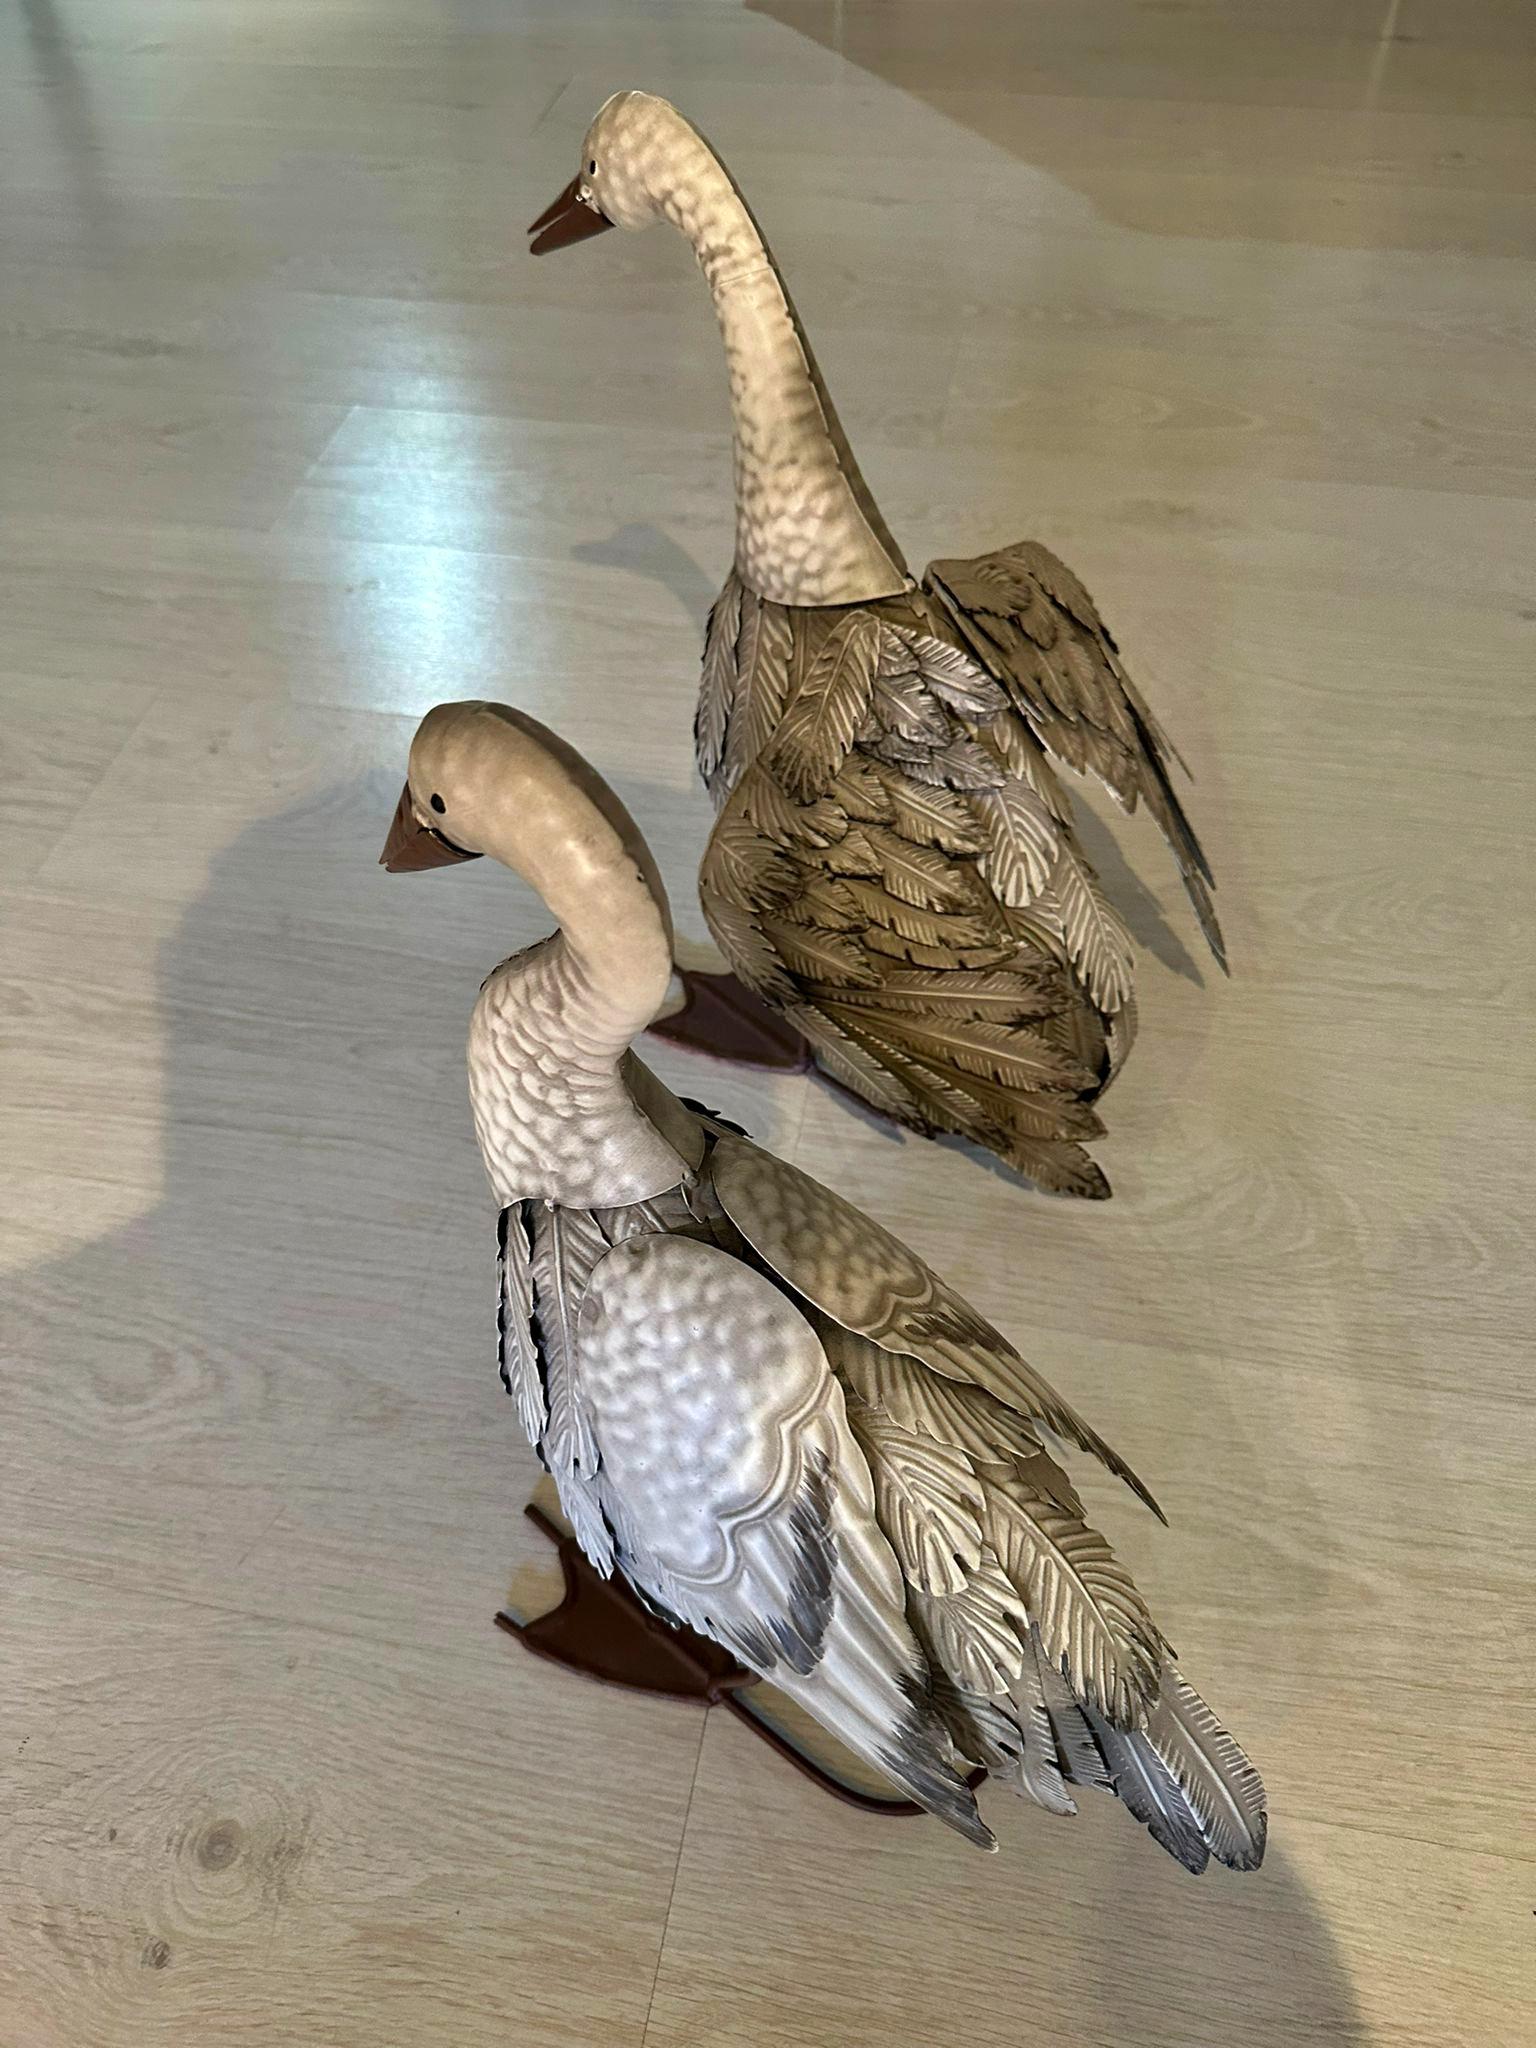 Pair of 20th Century Italian Geese
metal
45cm high x 25cm
perfect condition, like new